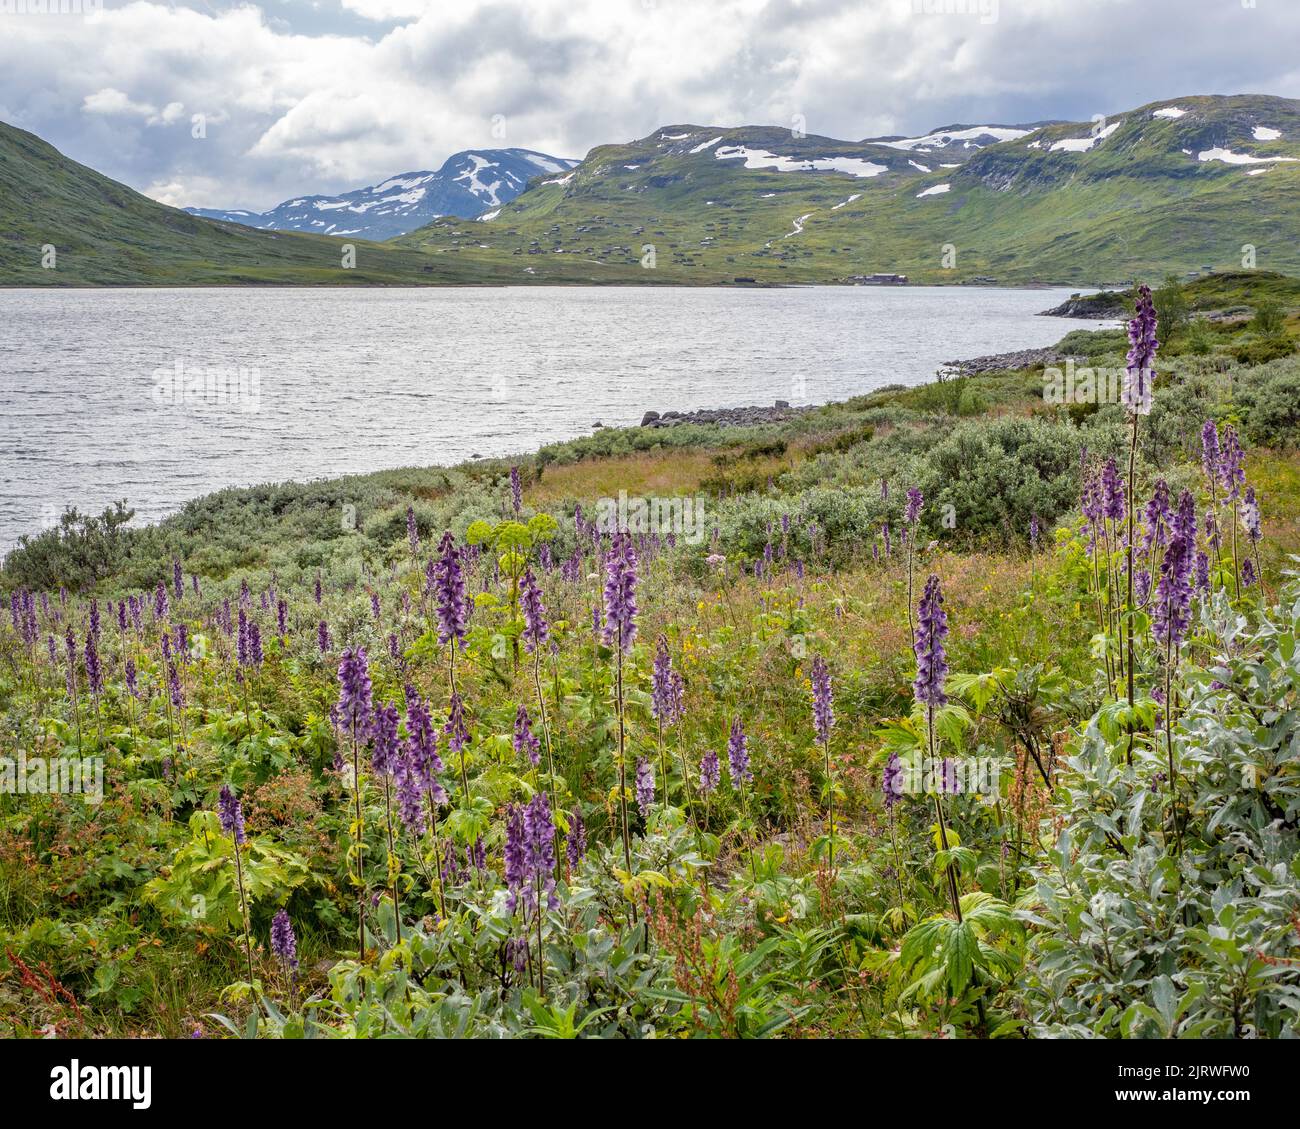 Monkshood Aconitum napellus and dwarf willow trees at 1400m overlooking Lake Bygdin in the Jotunheimen National Park Norway Stock Photo